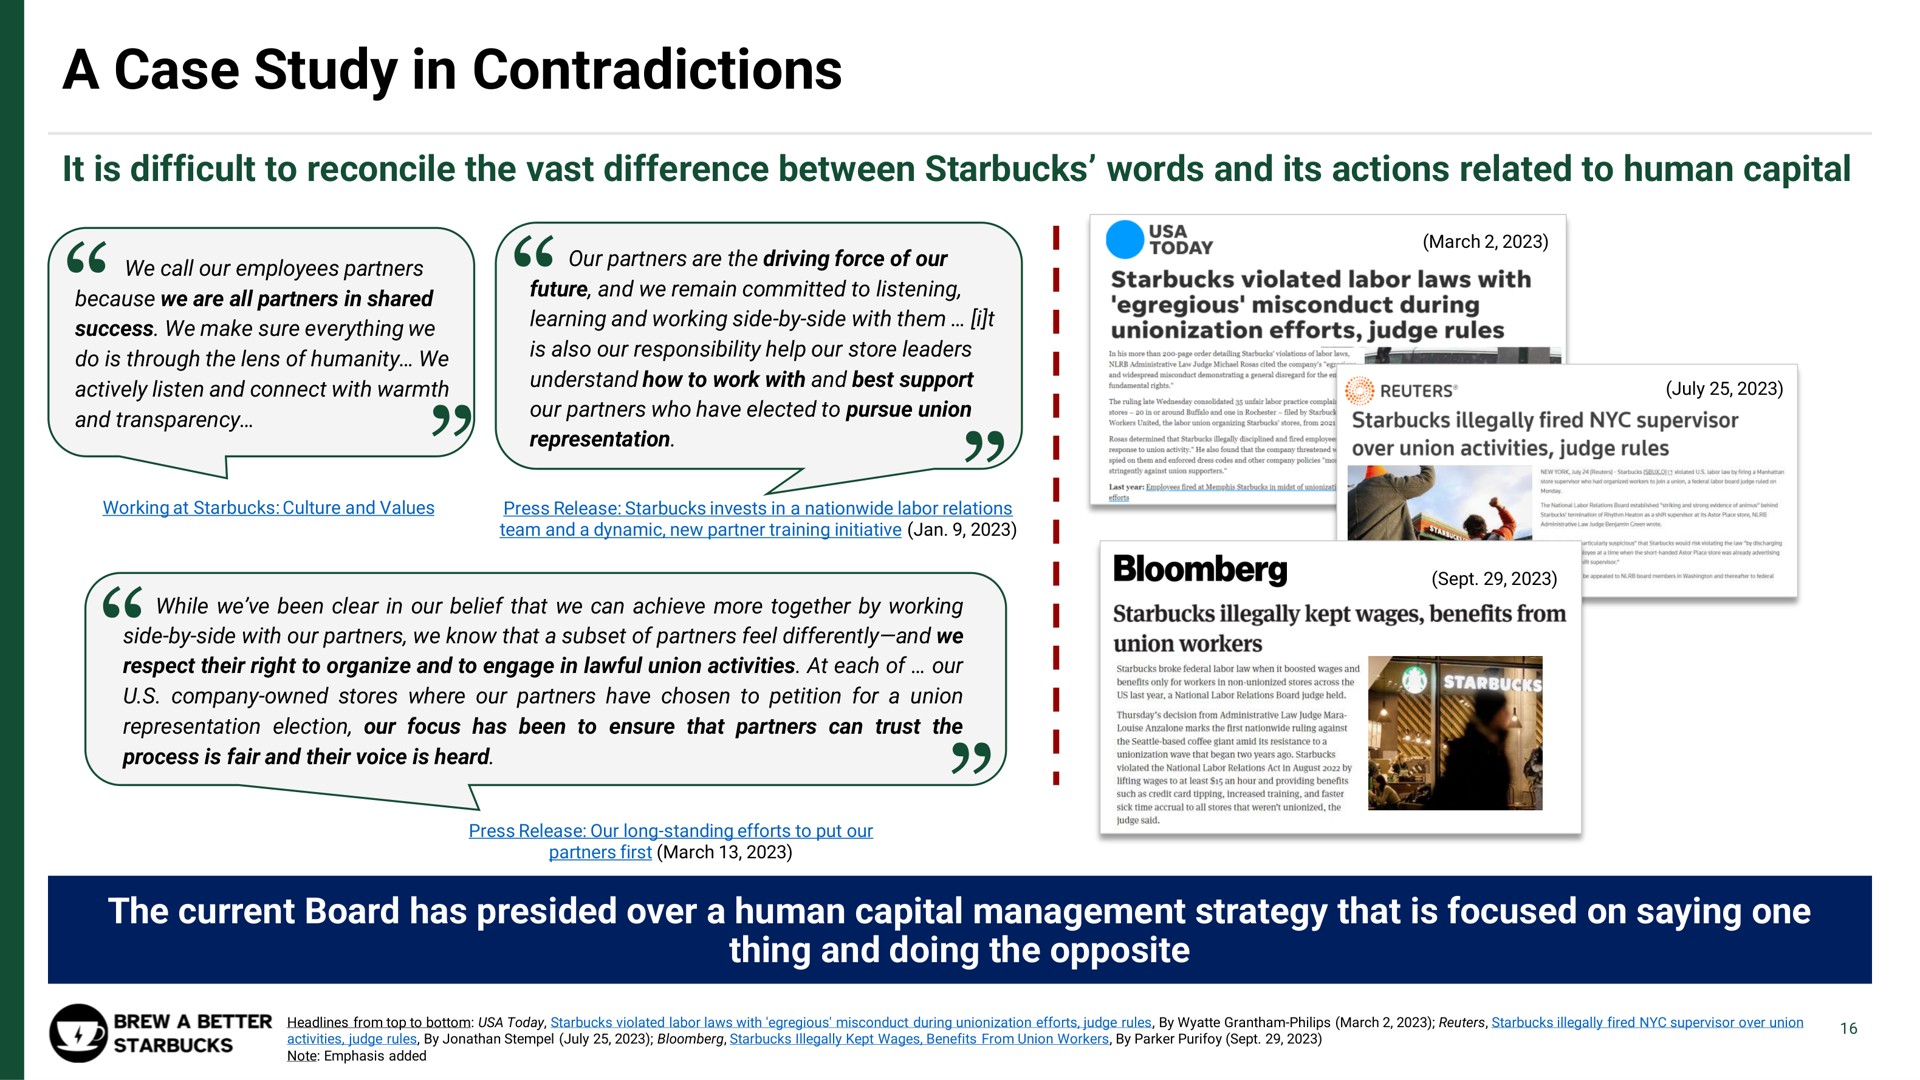 a case study in contradictions i | Strategic Organizing Center